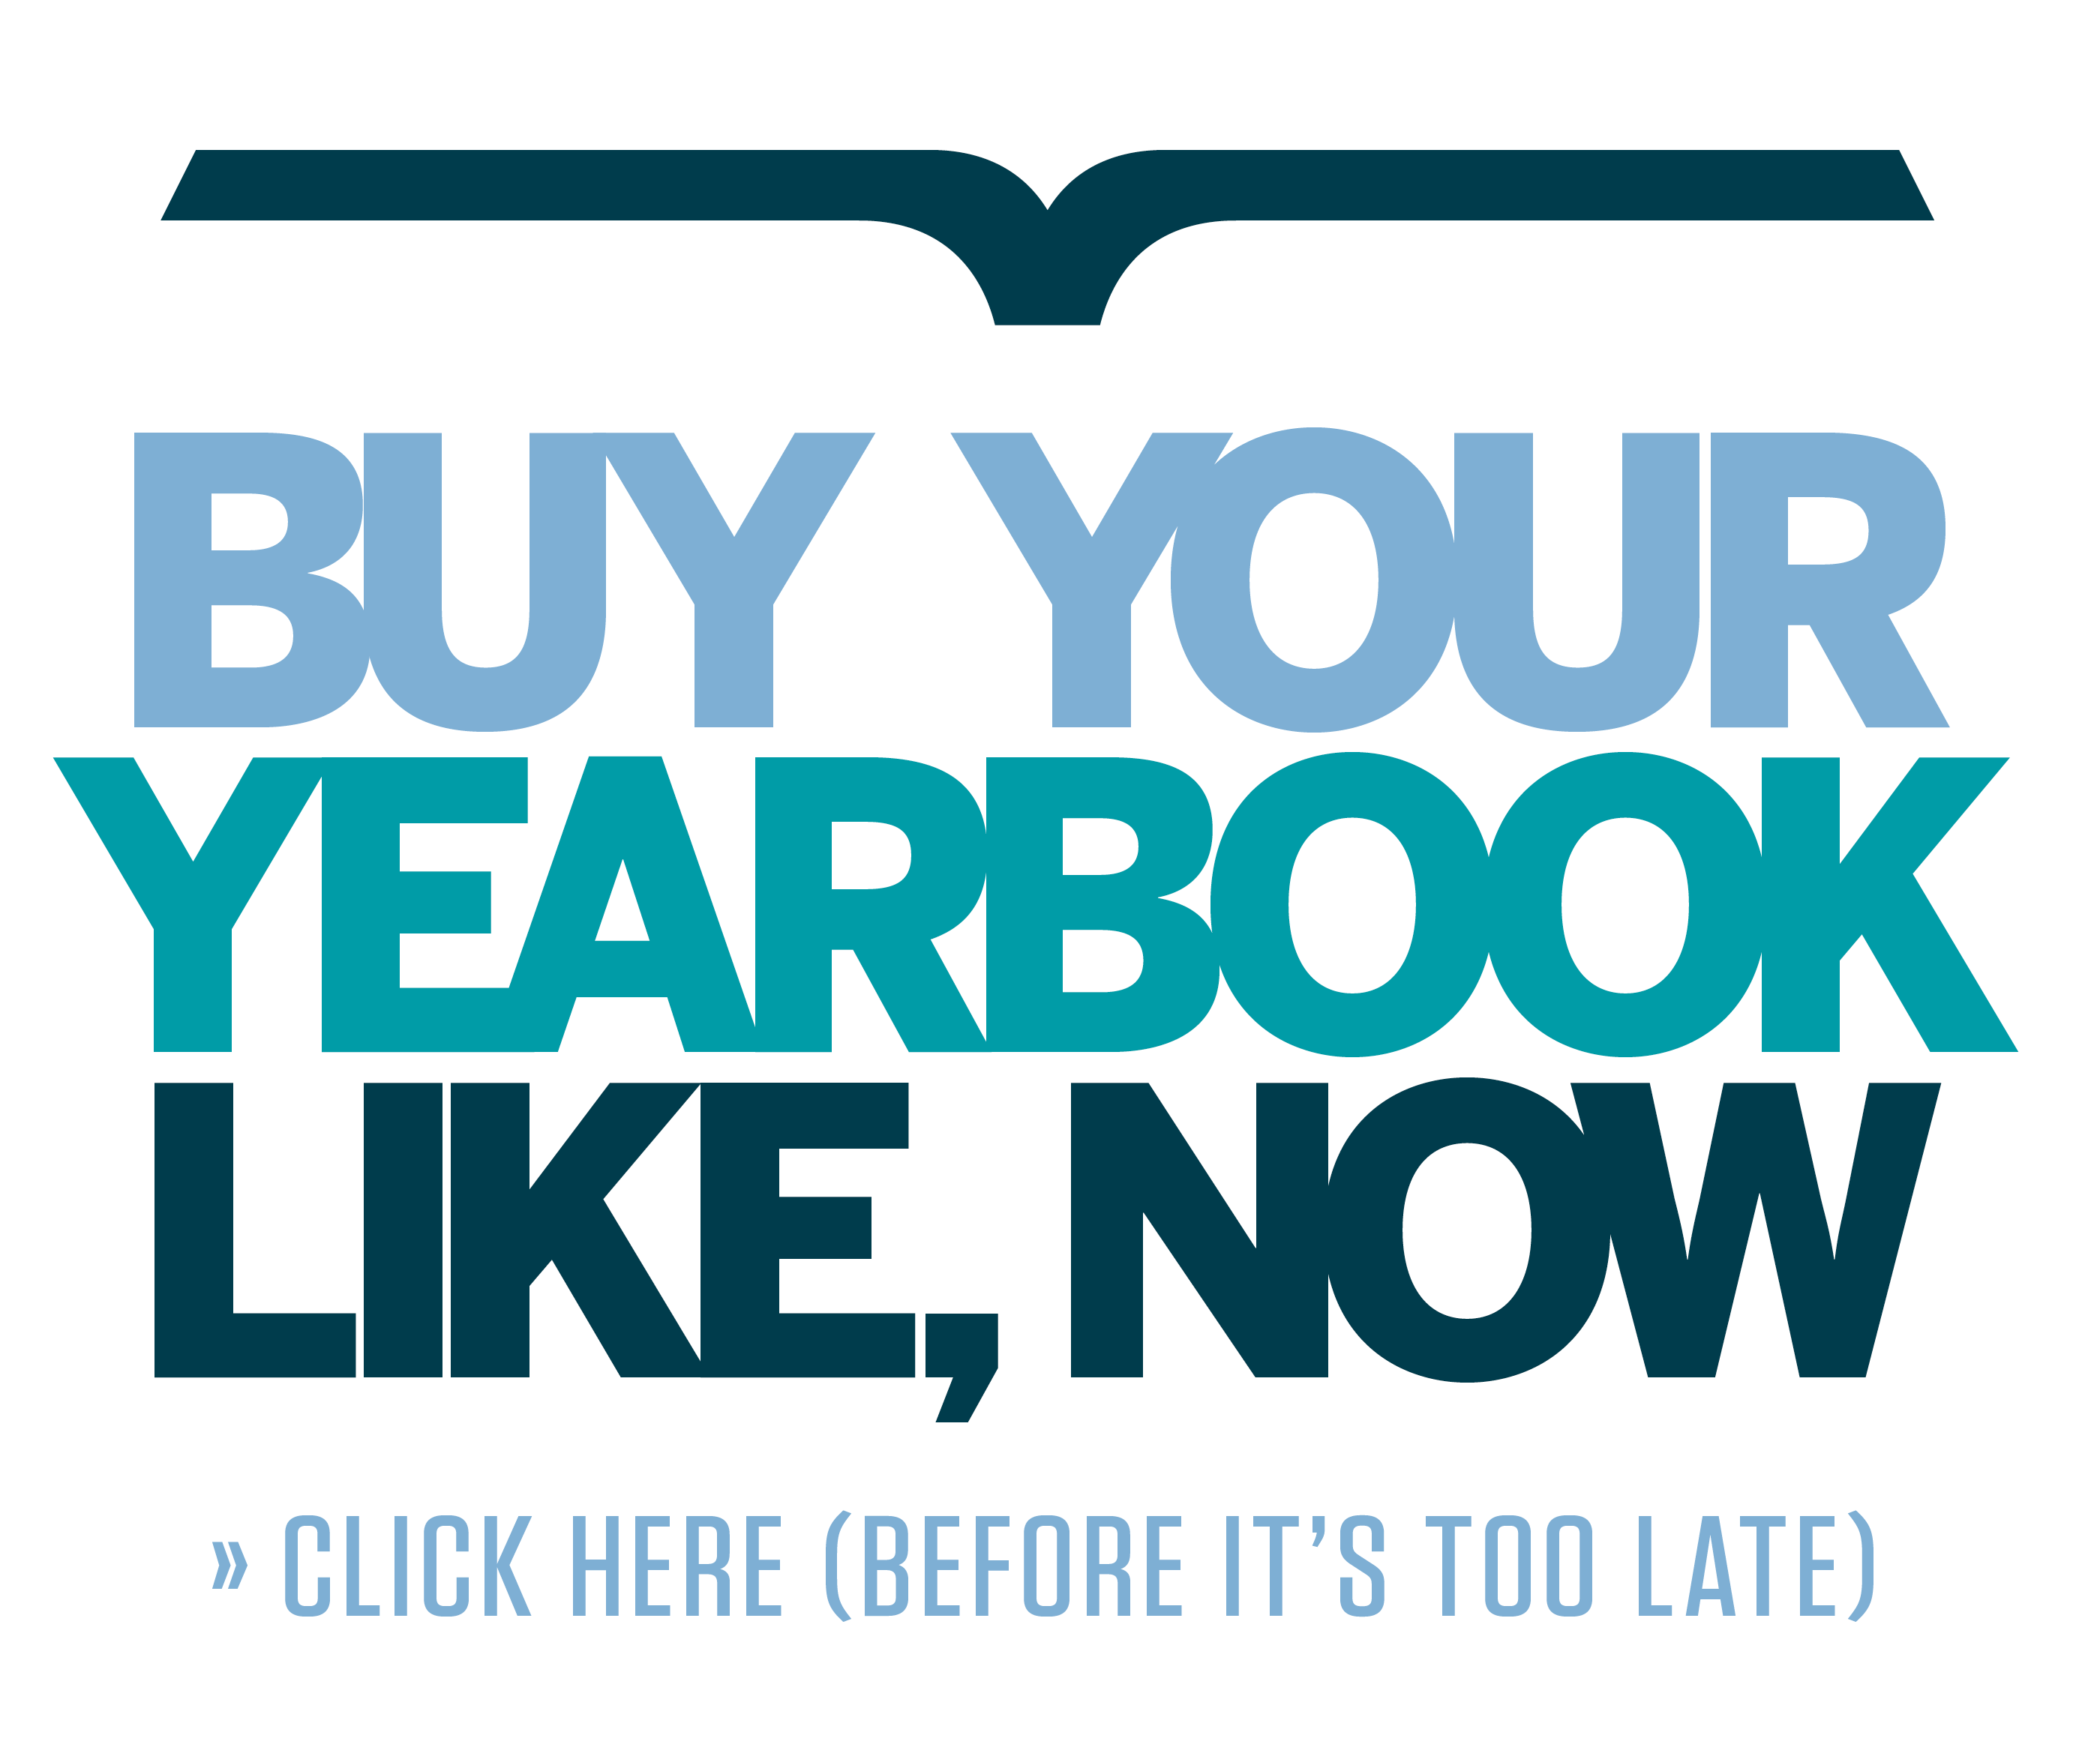 Text: Buy your yearbook, like now. Click here before it's too late.